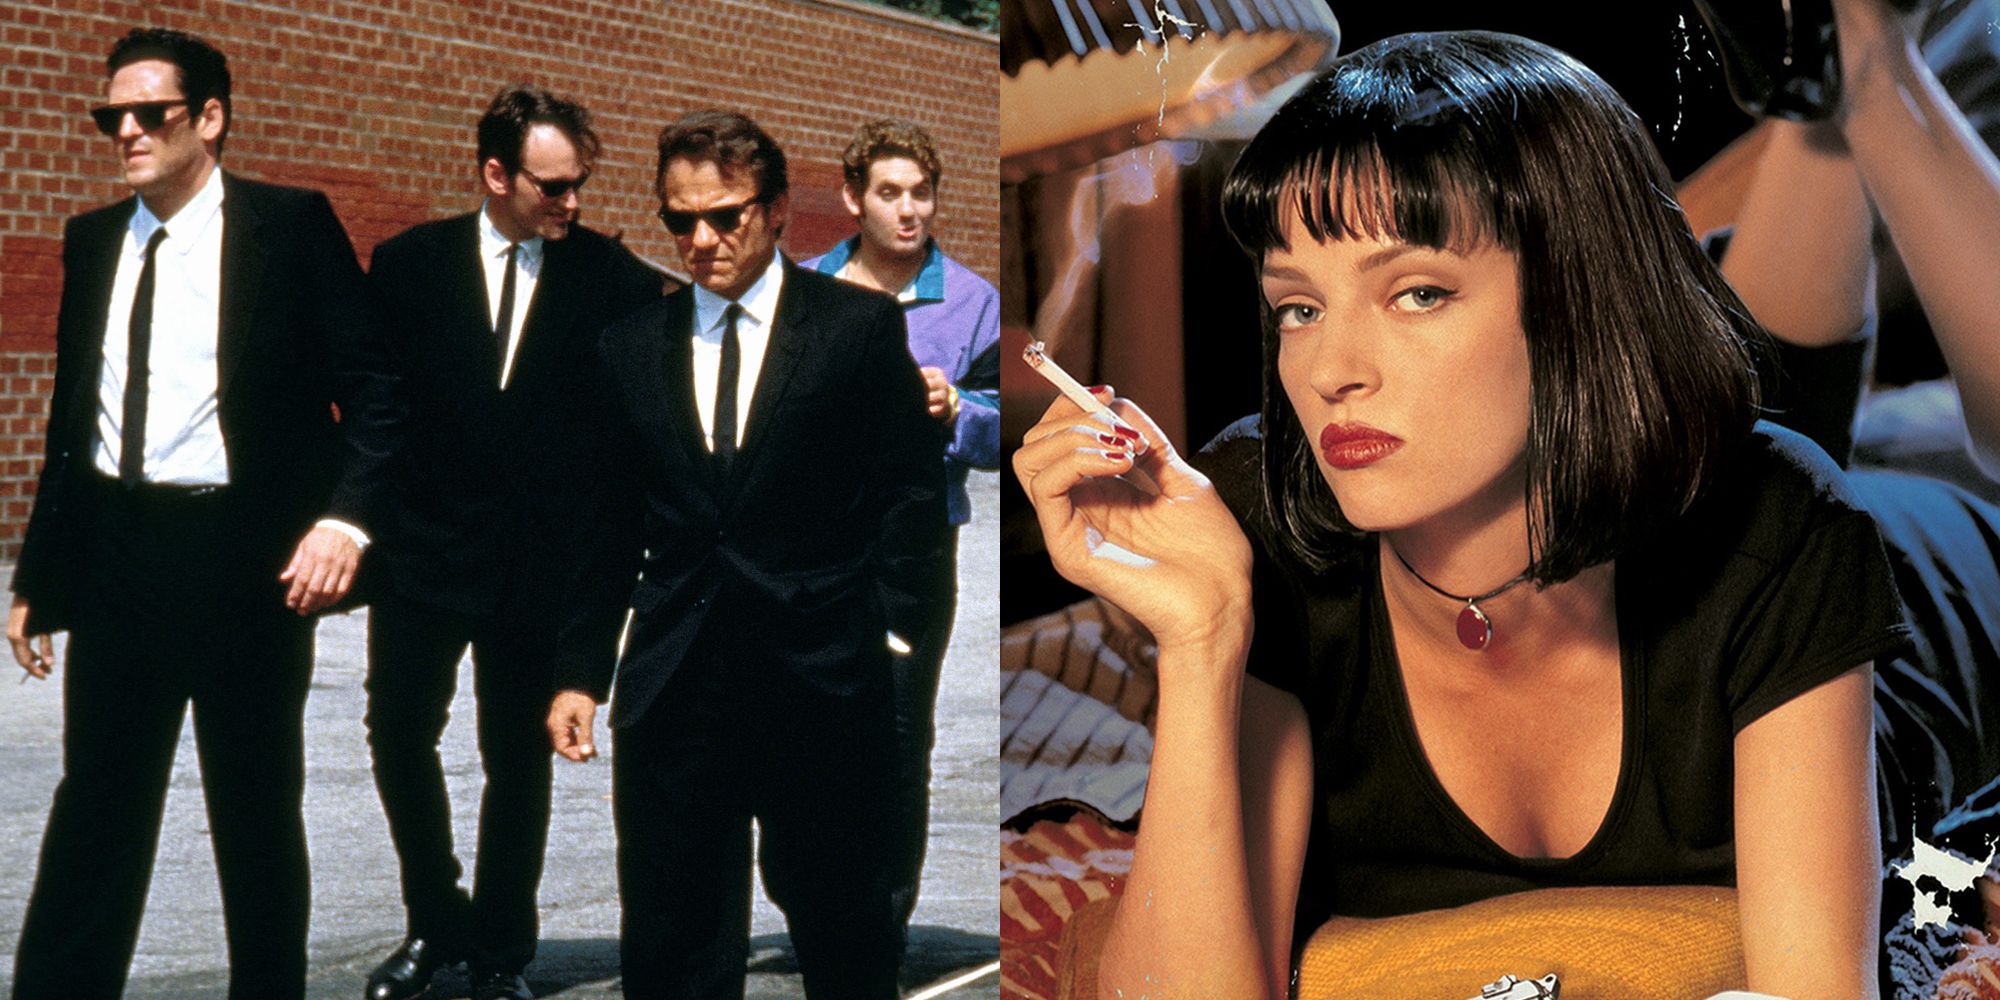 Reservoir Dogs and Pulp Fiction